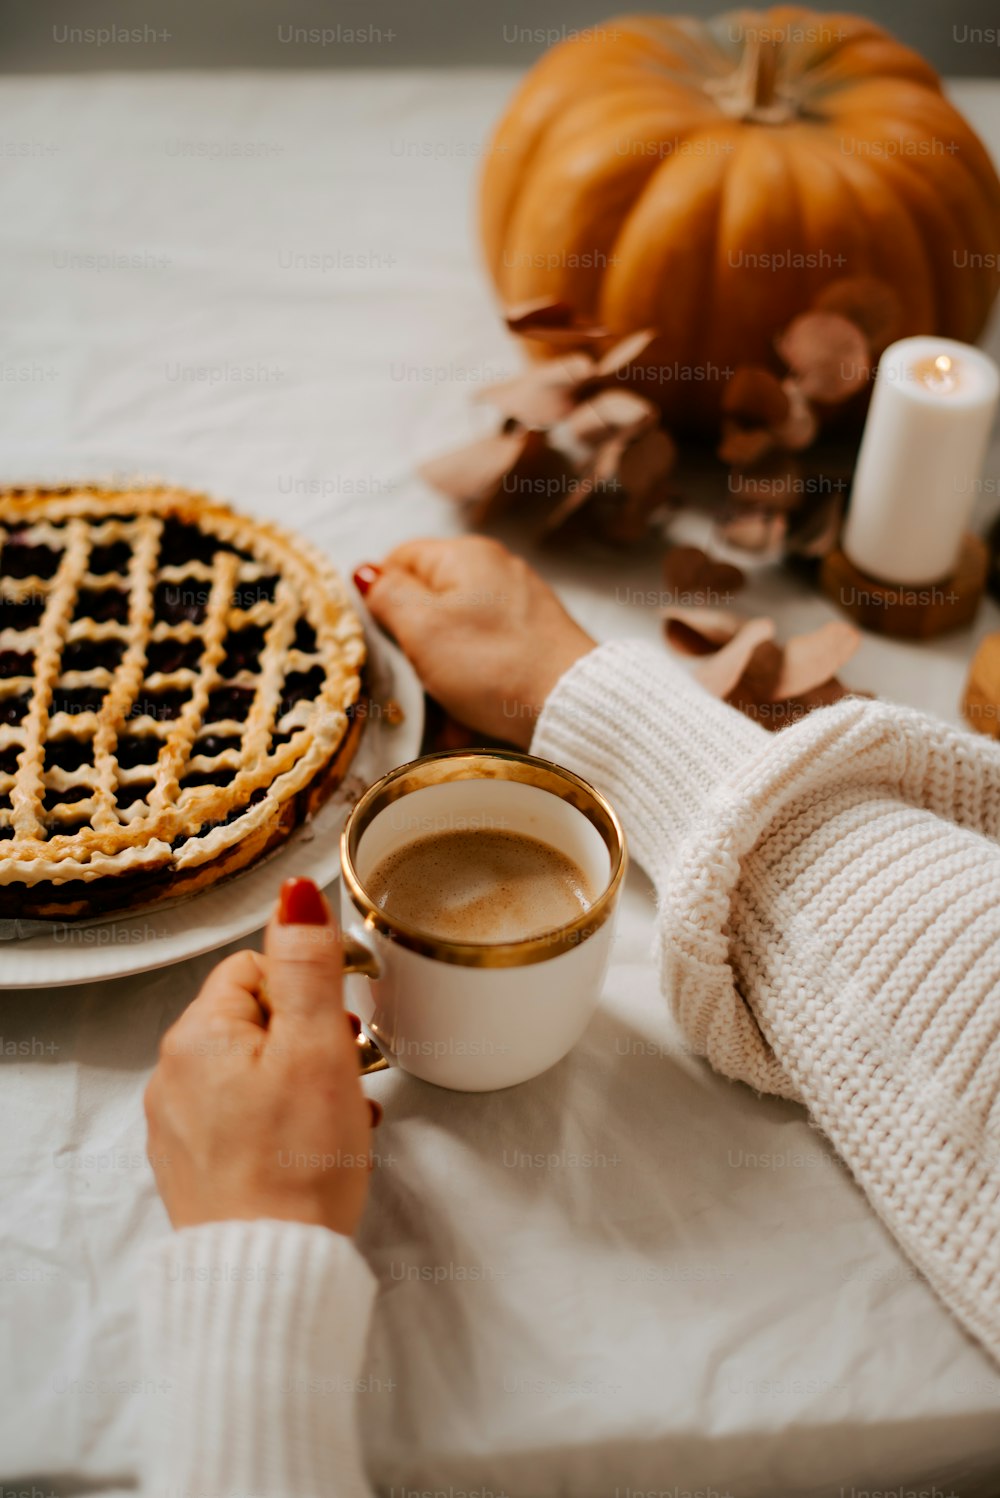 a woman holding a cup of coffee next to a pie